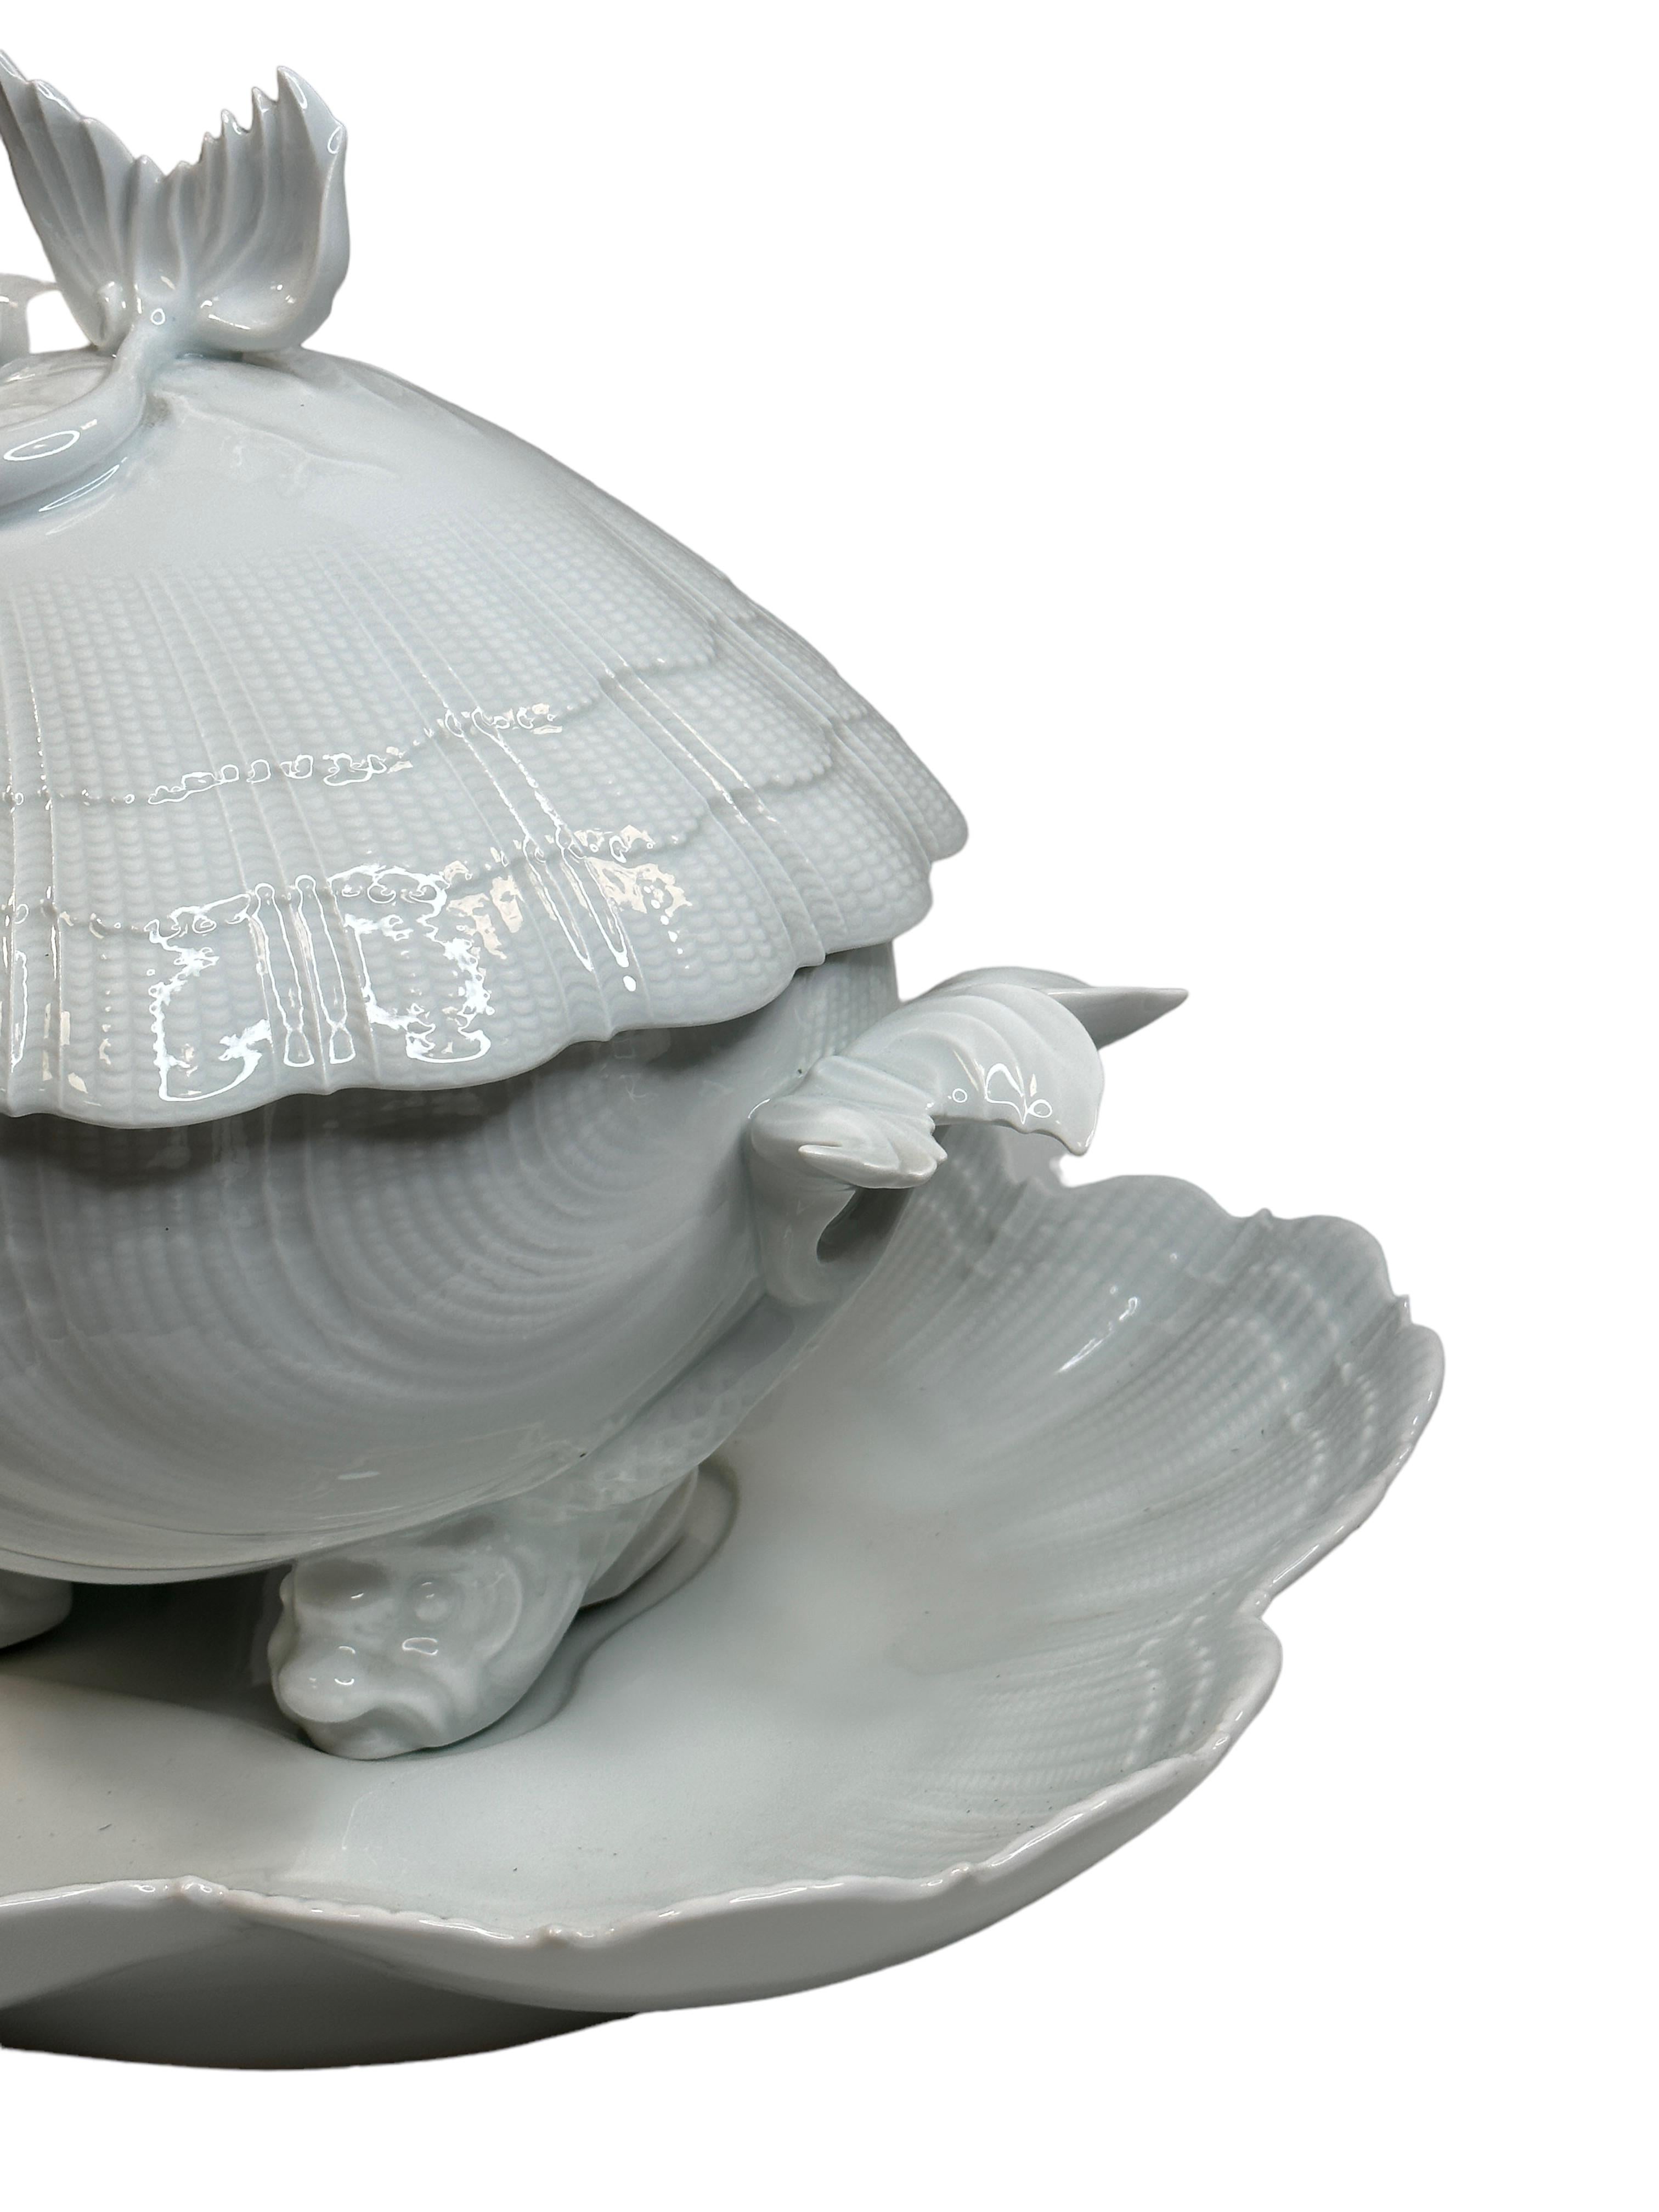 French Exceptional Shell Shaped Limoges China Porcelain Soup Tureen with Dolphin Decor For Sale